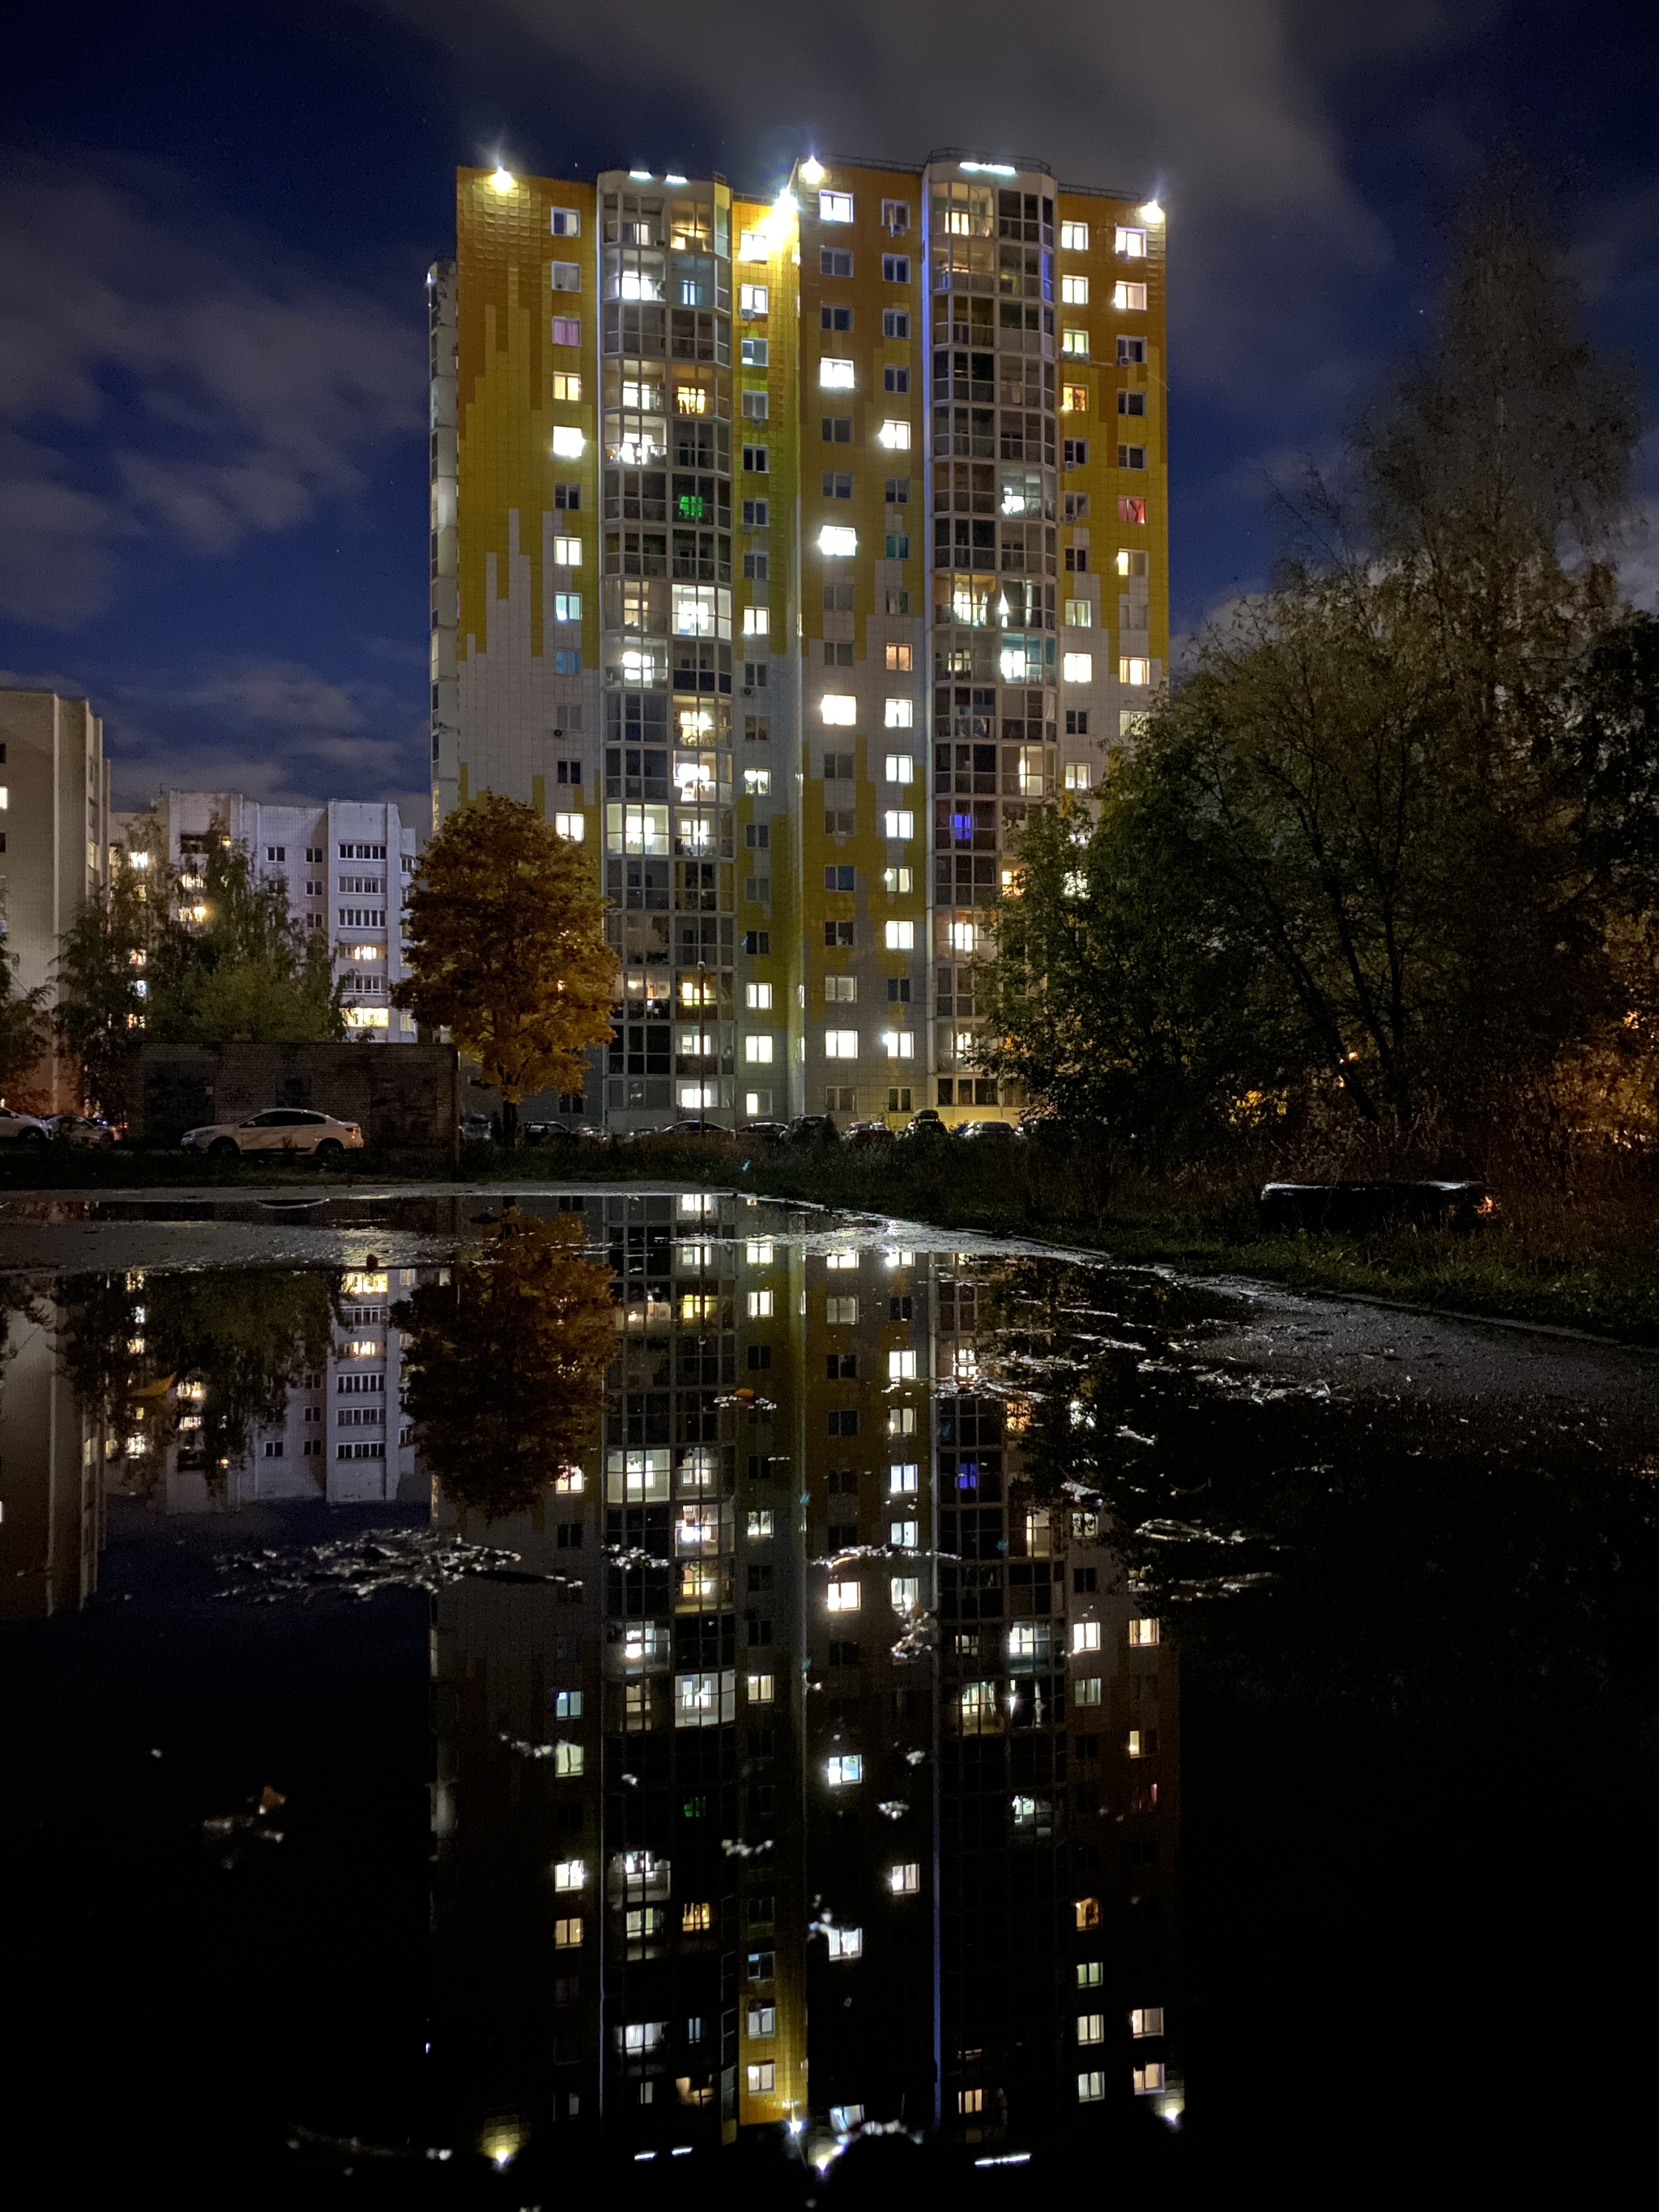 autumn night - My, Mobile photography, Autumn, Puddle, Tver, Reflection